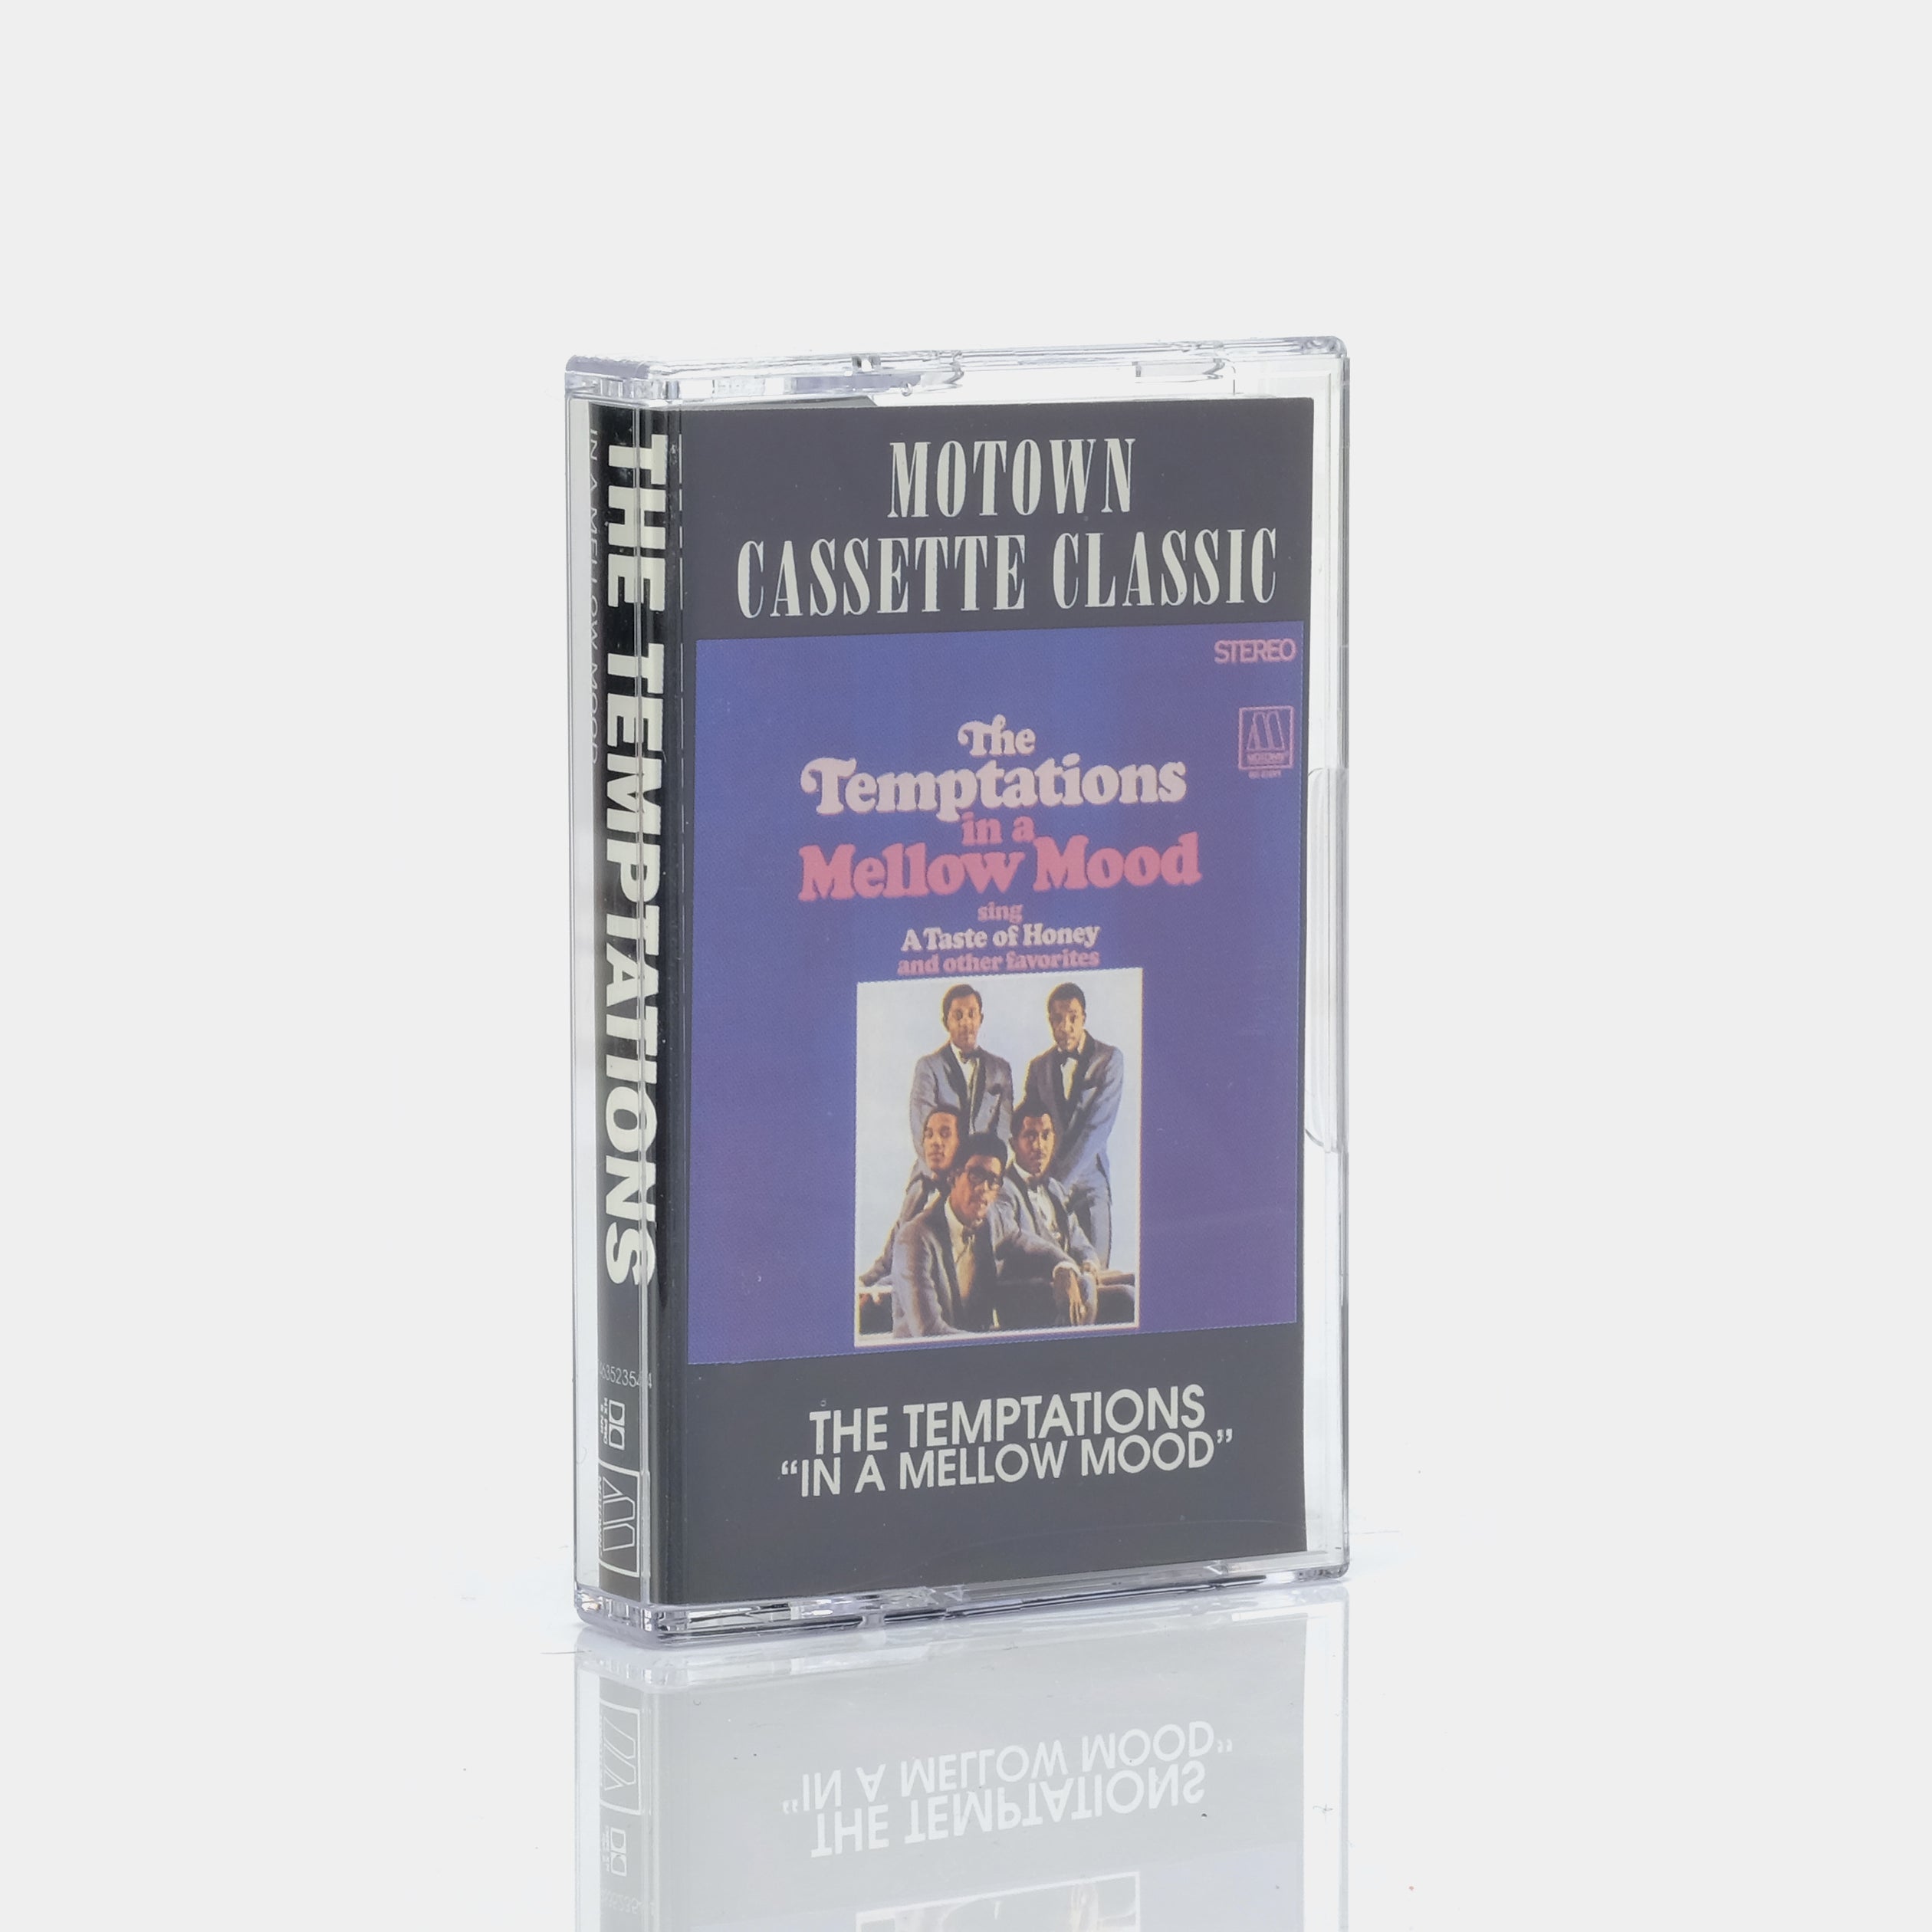 The Temptations - In A Mellow Mood Cassette Tape